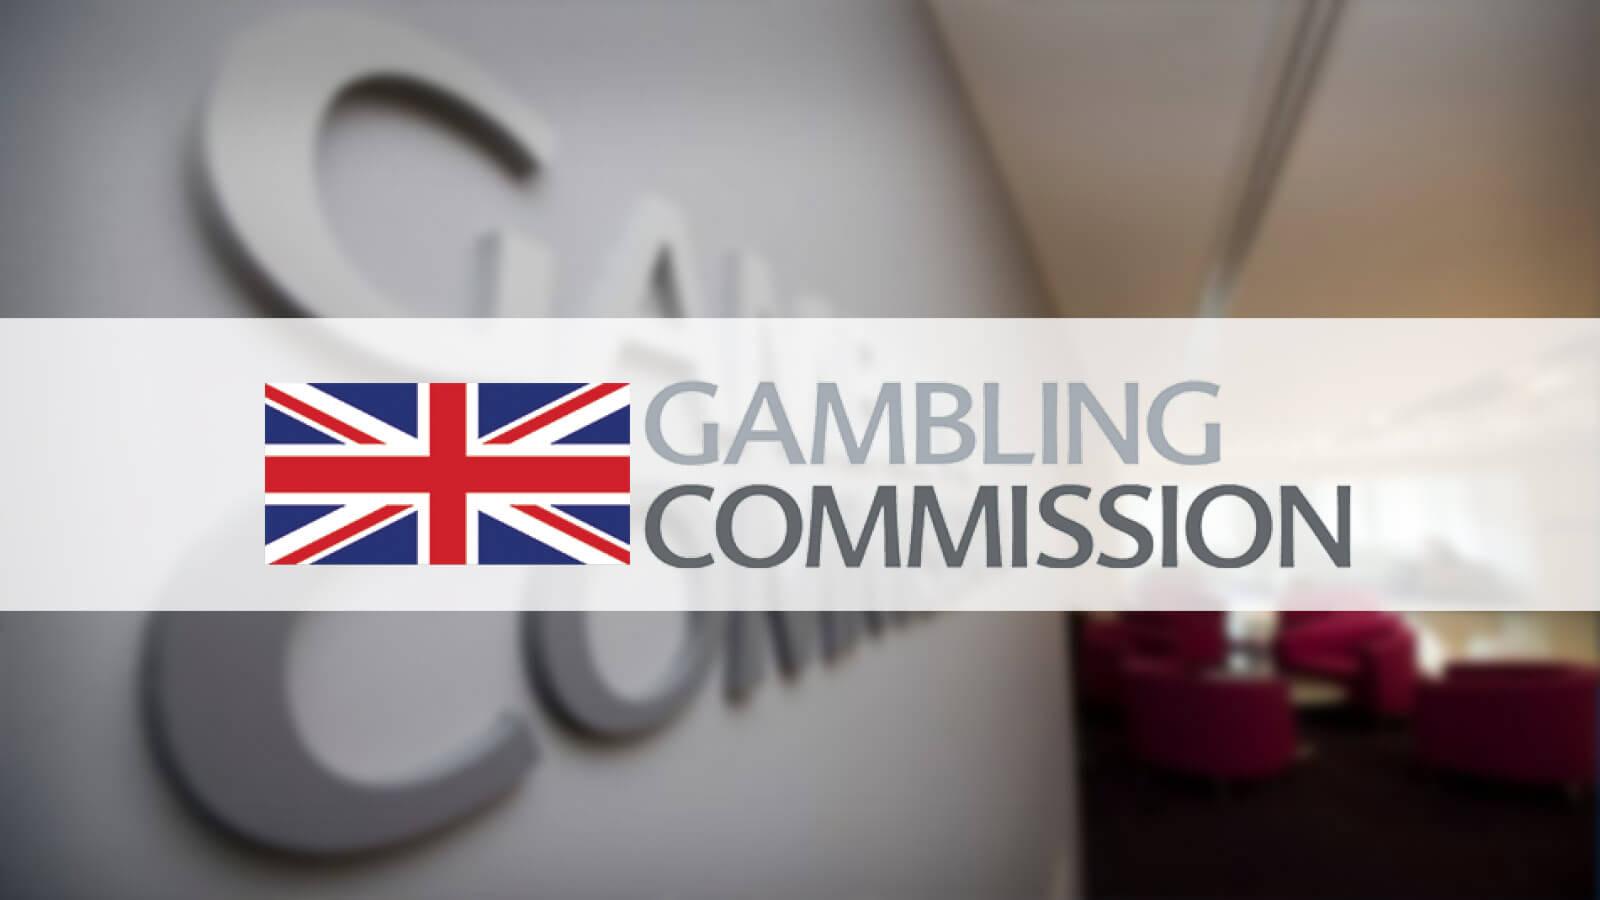 The UK Gambling Commission and how it operates